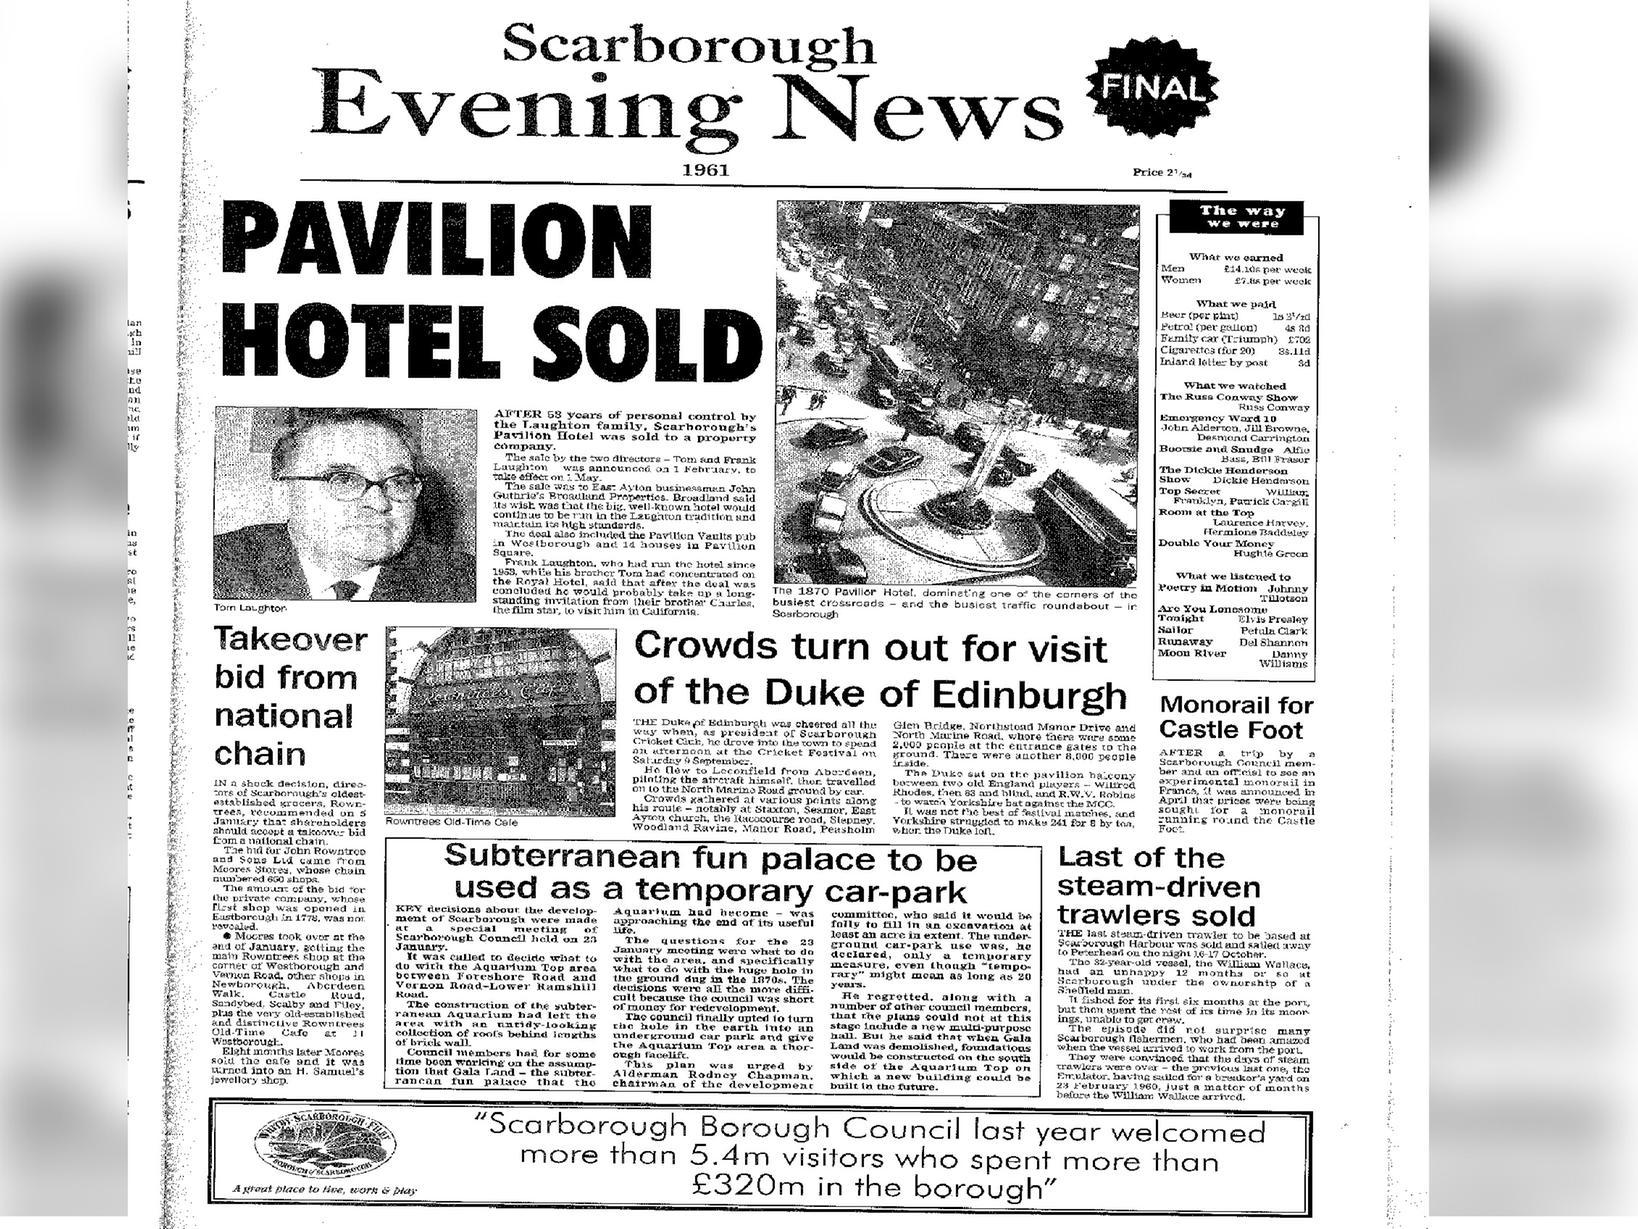 After 53 years of personal control by the Laughton family, Scarborough's Pavilion Hotel was sold to a property company. Also featured: the Duke of Edinburgh's visit to the Cricket Festival.